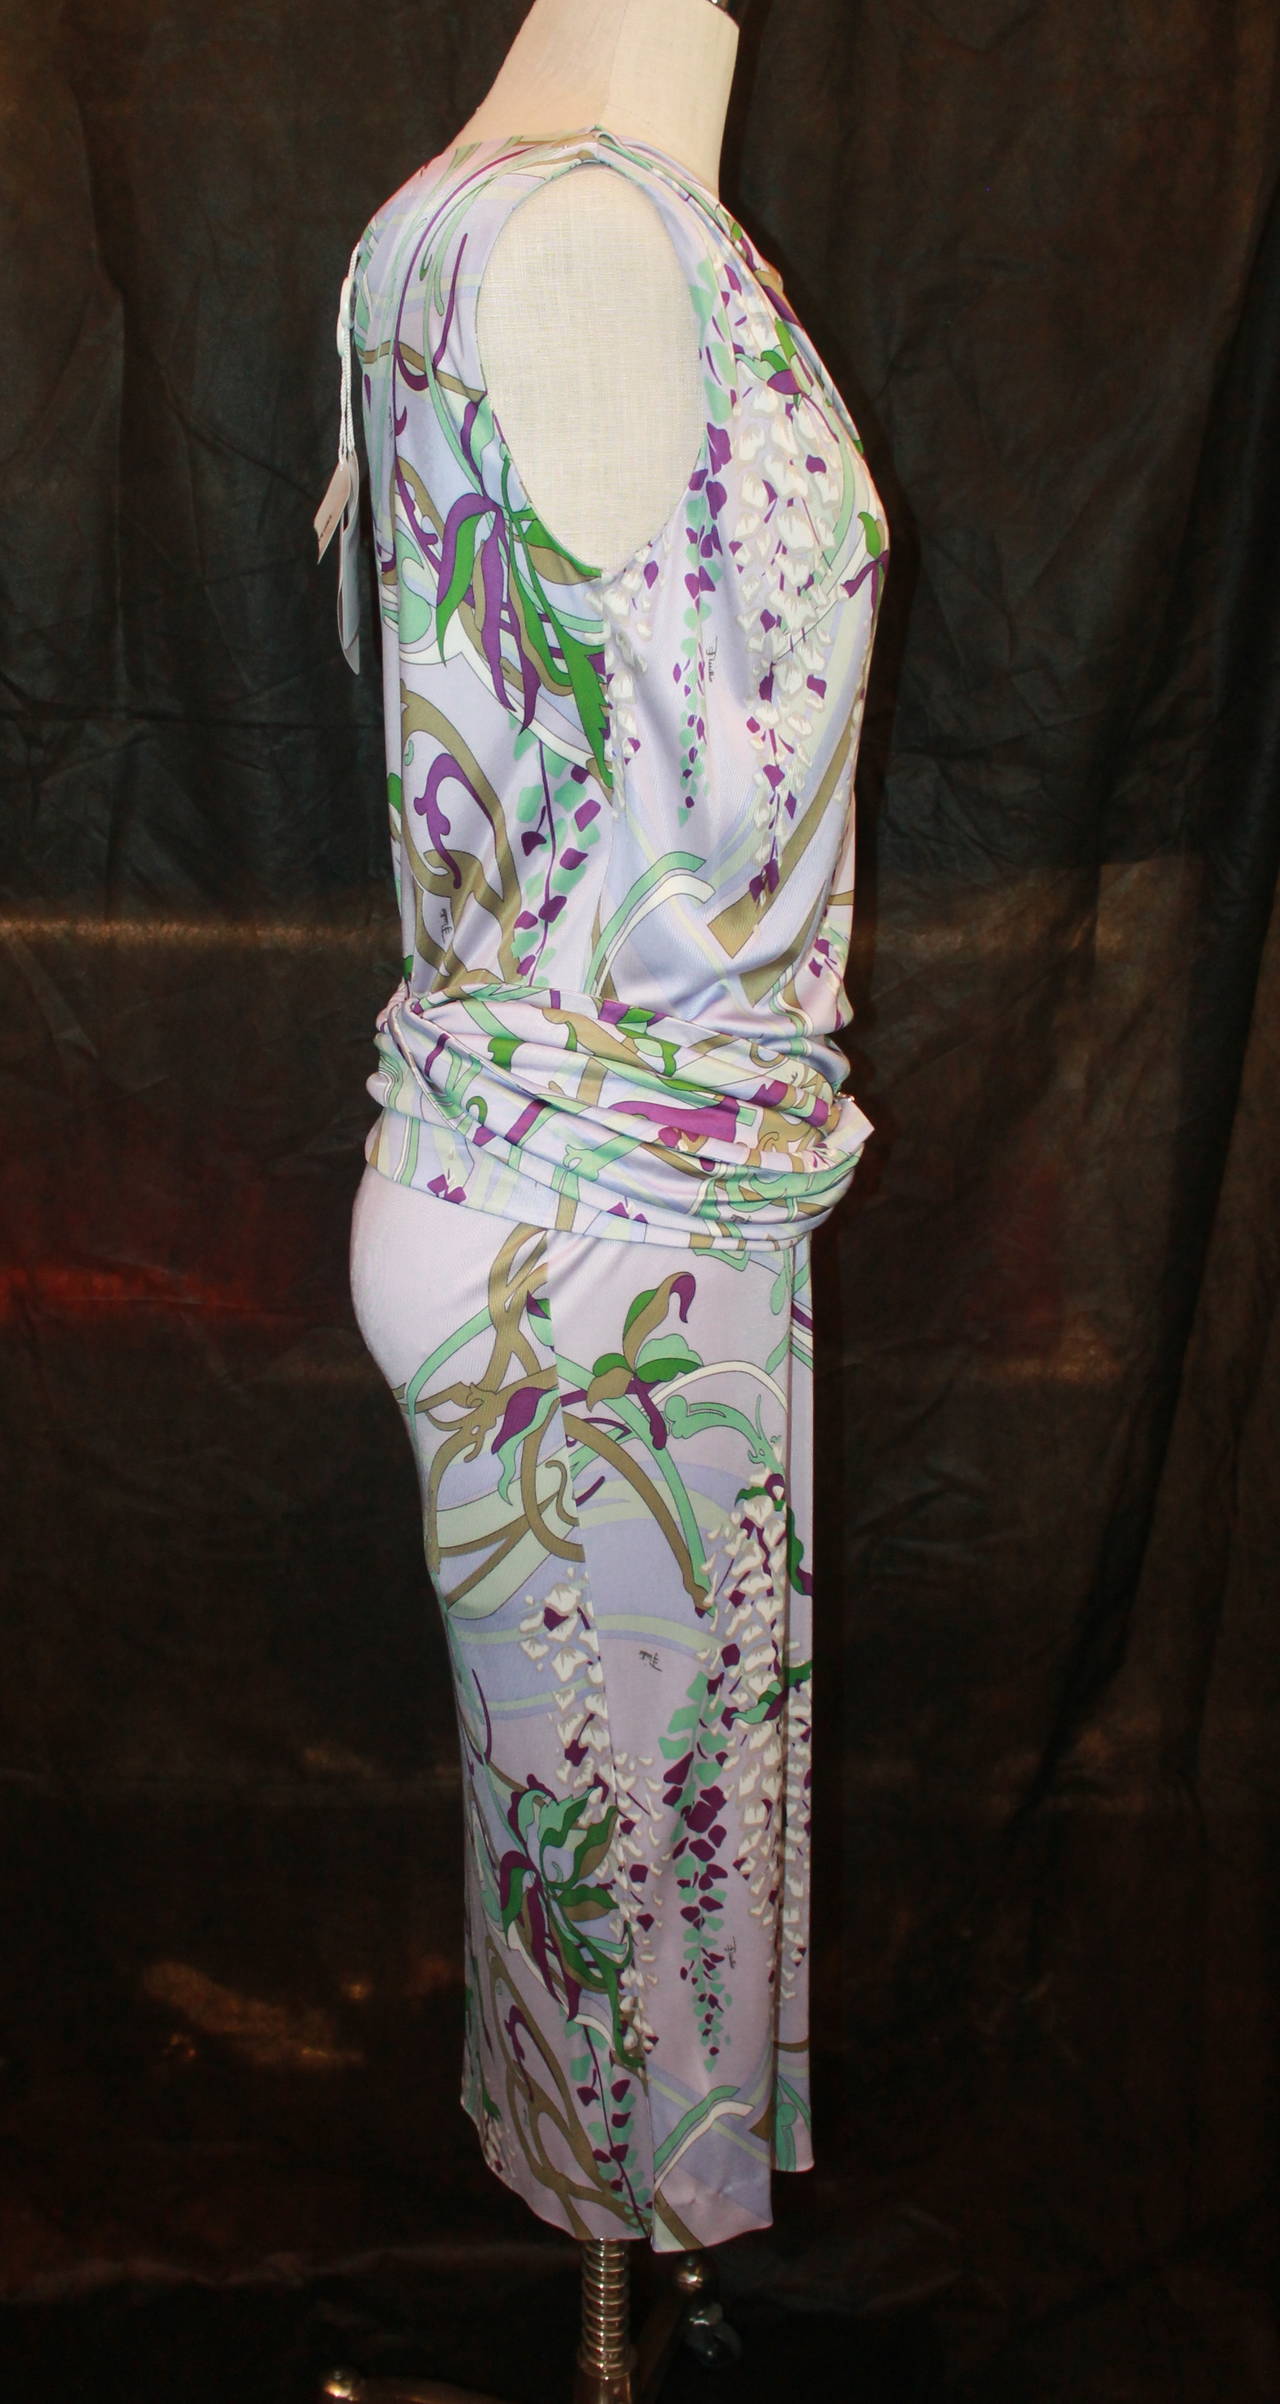 Emilio Pucci Lavender & Green Sleeveless Jersey Dress with Belt - 46. This dress is in excellent condition and comes with a duster for the matching belt that is included.

Measurements:
Bust/Waist/Hips- 34